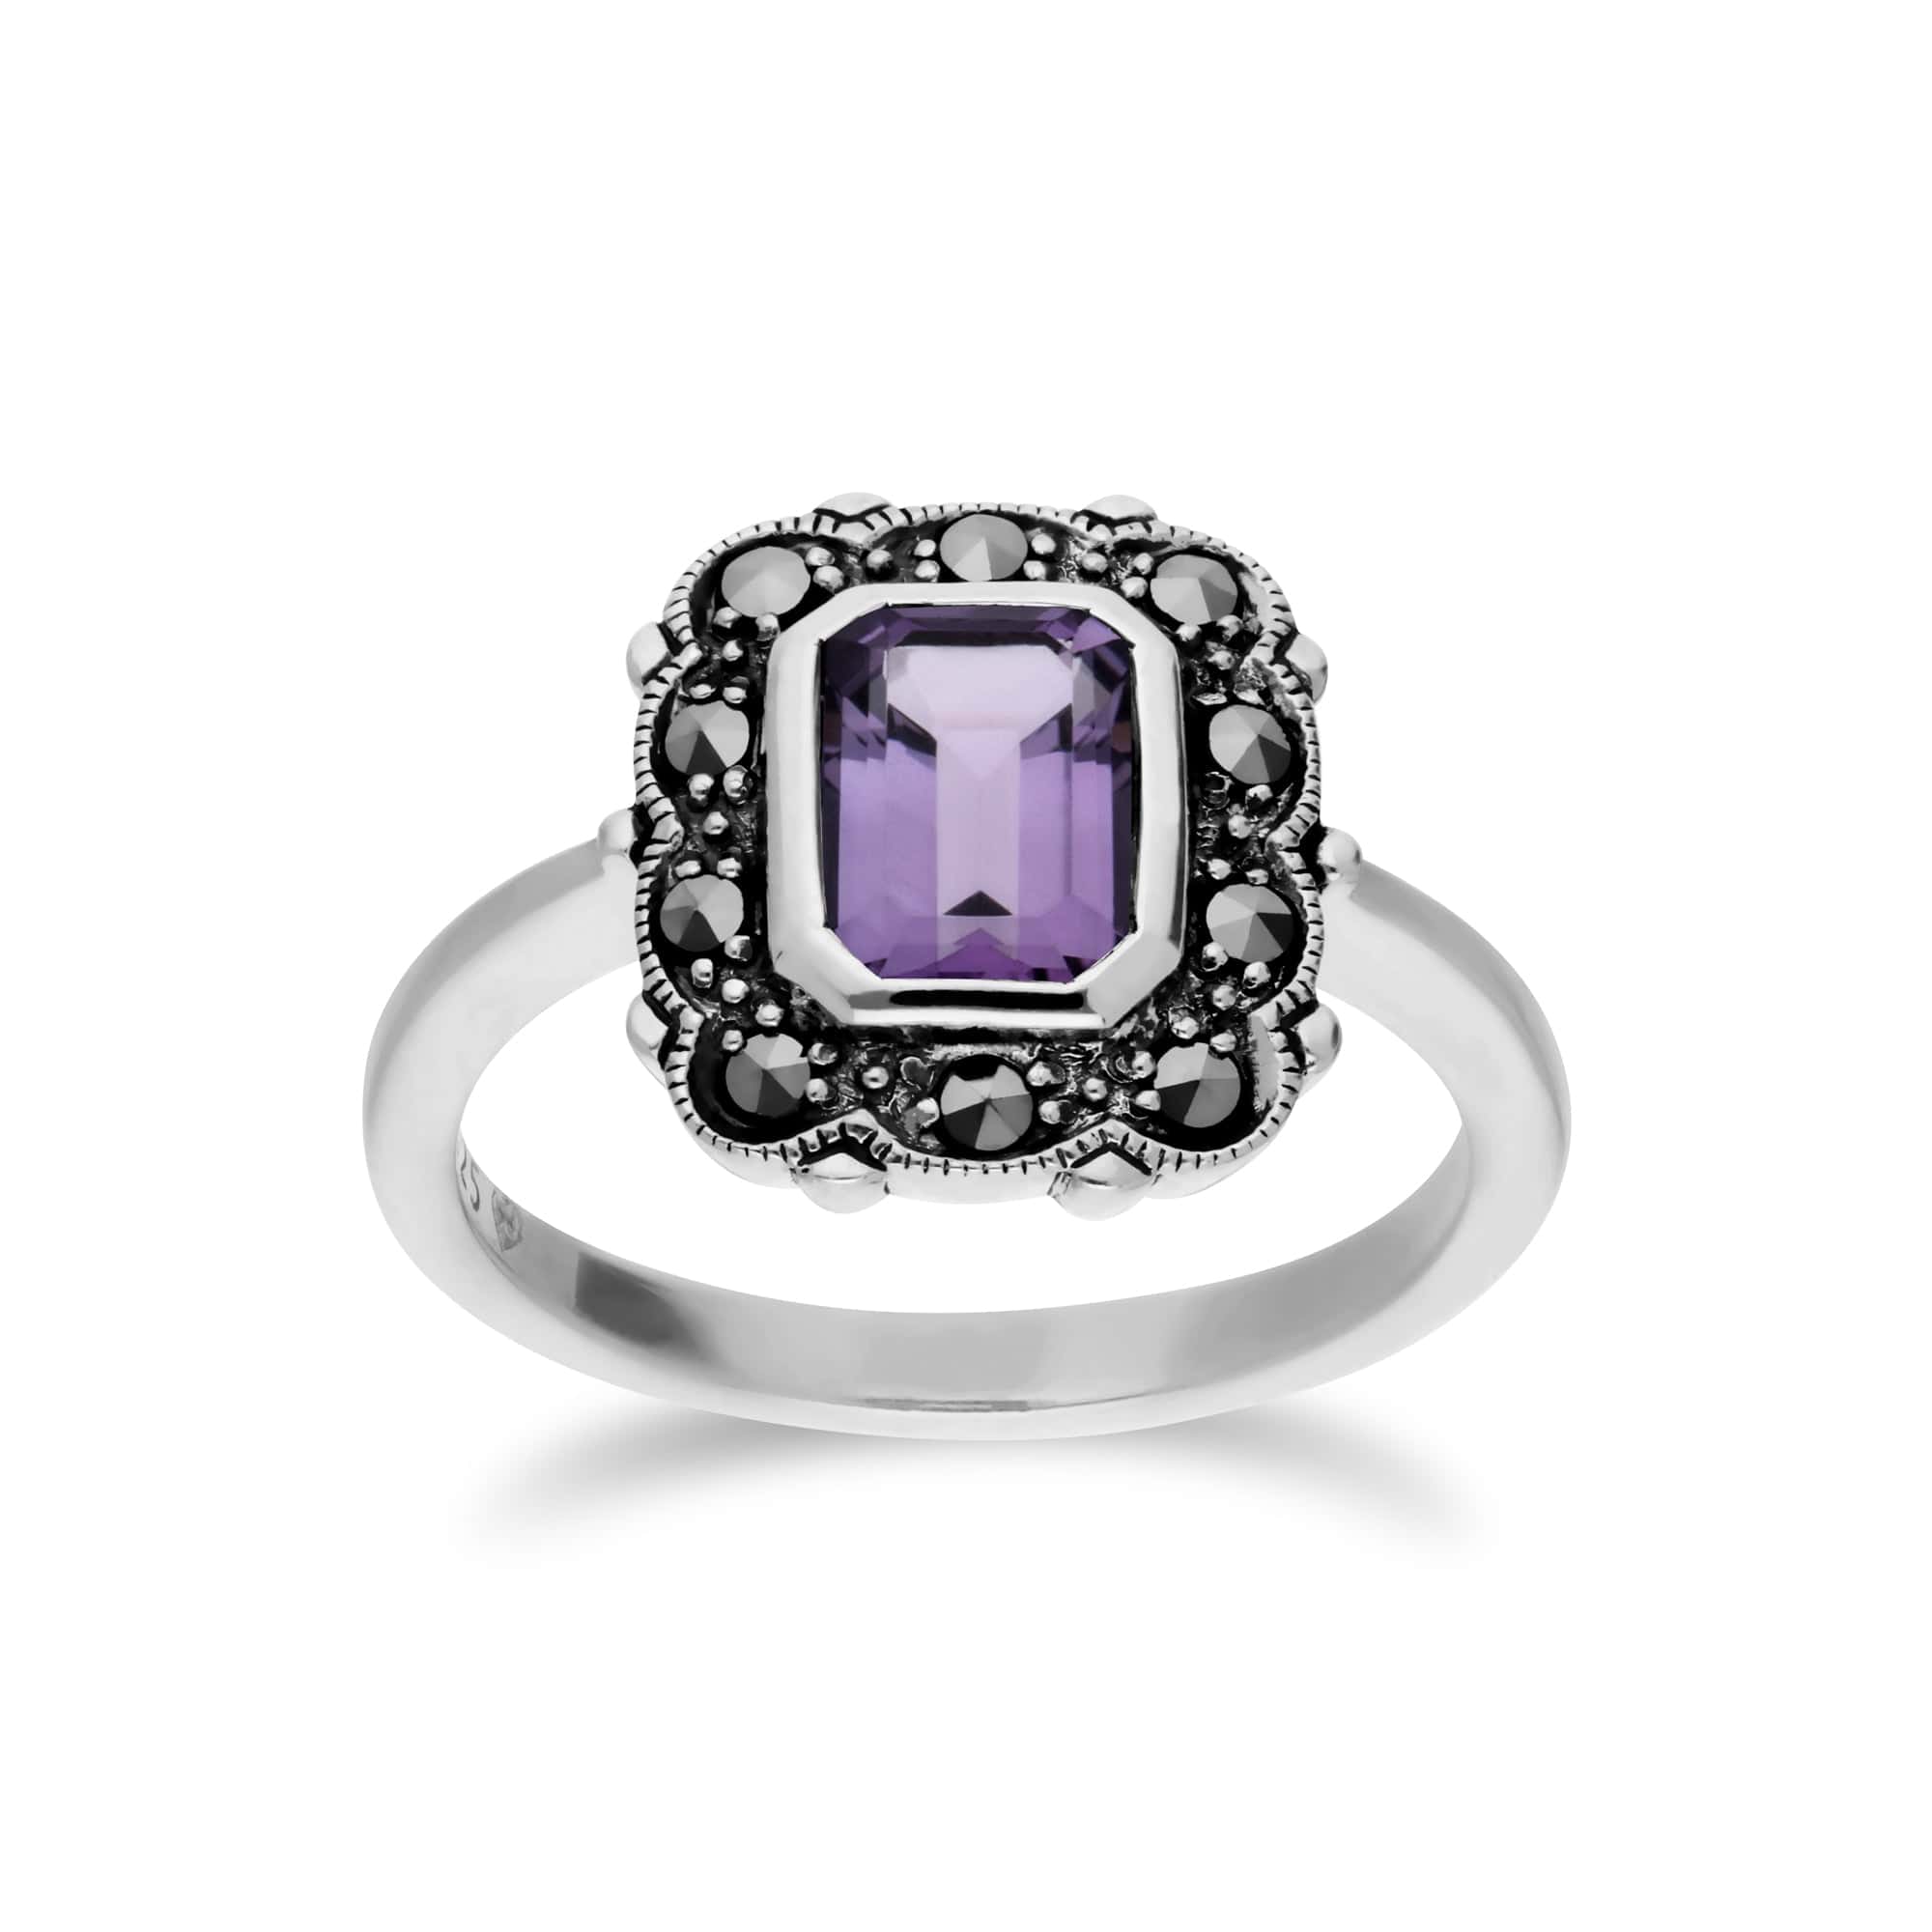 214R597102925 Art Nouveau Style Octagon Amethyst & Marcasite Border Ring in 925 Sterling Silver 1